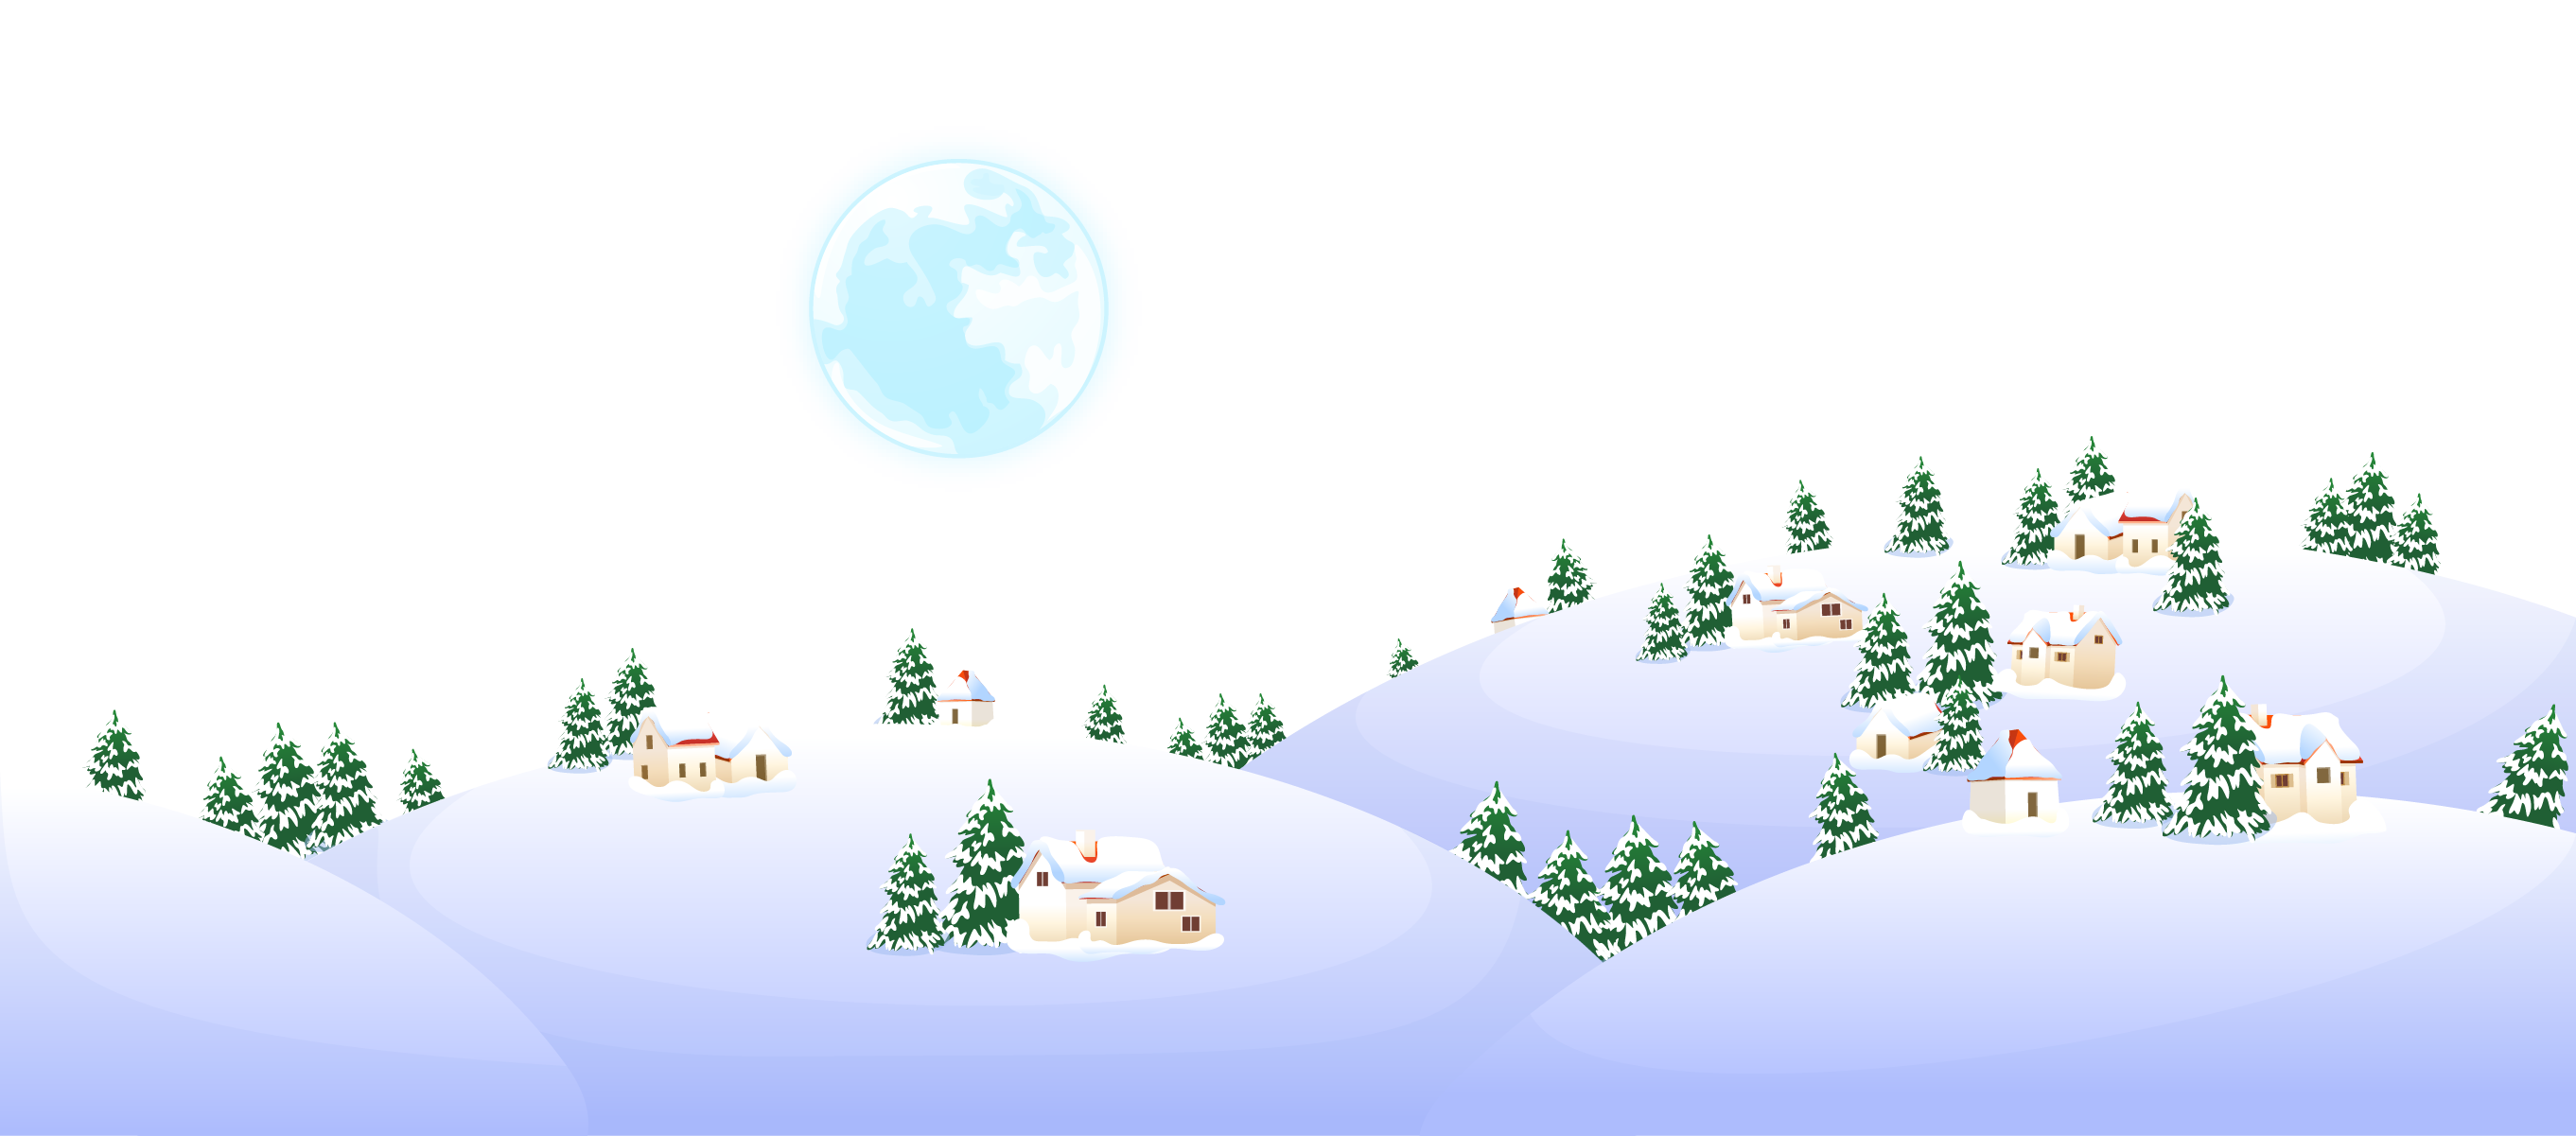 Download Snow Cartoon Icon Free Clipart HQ HQ PNG Image | FreePNGImg